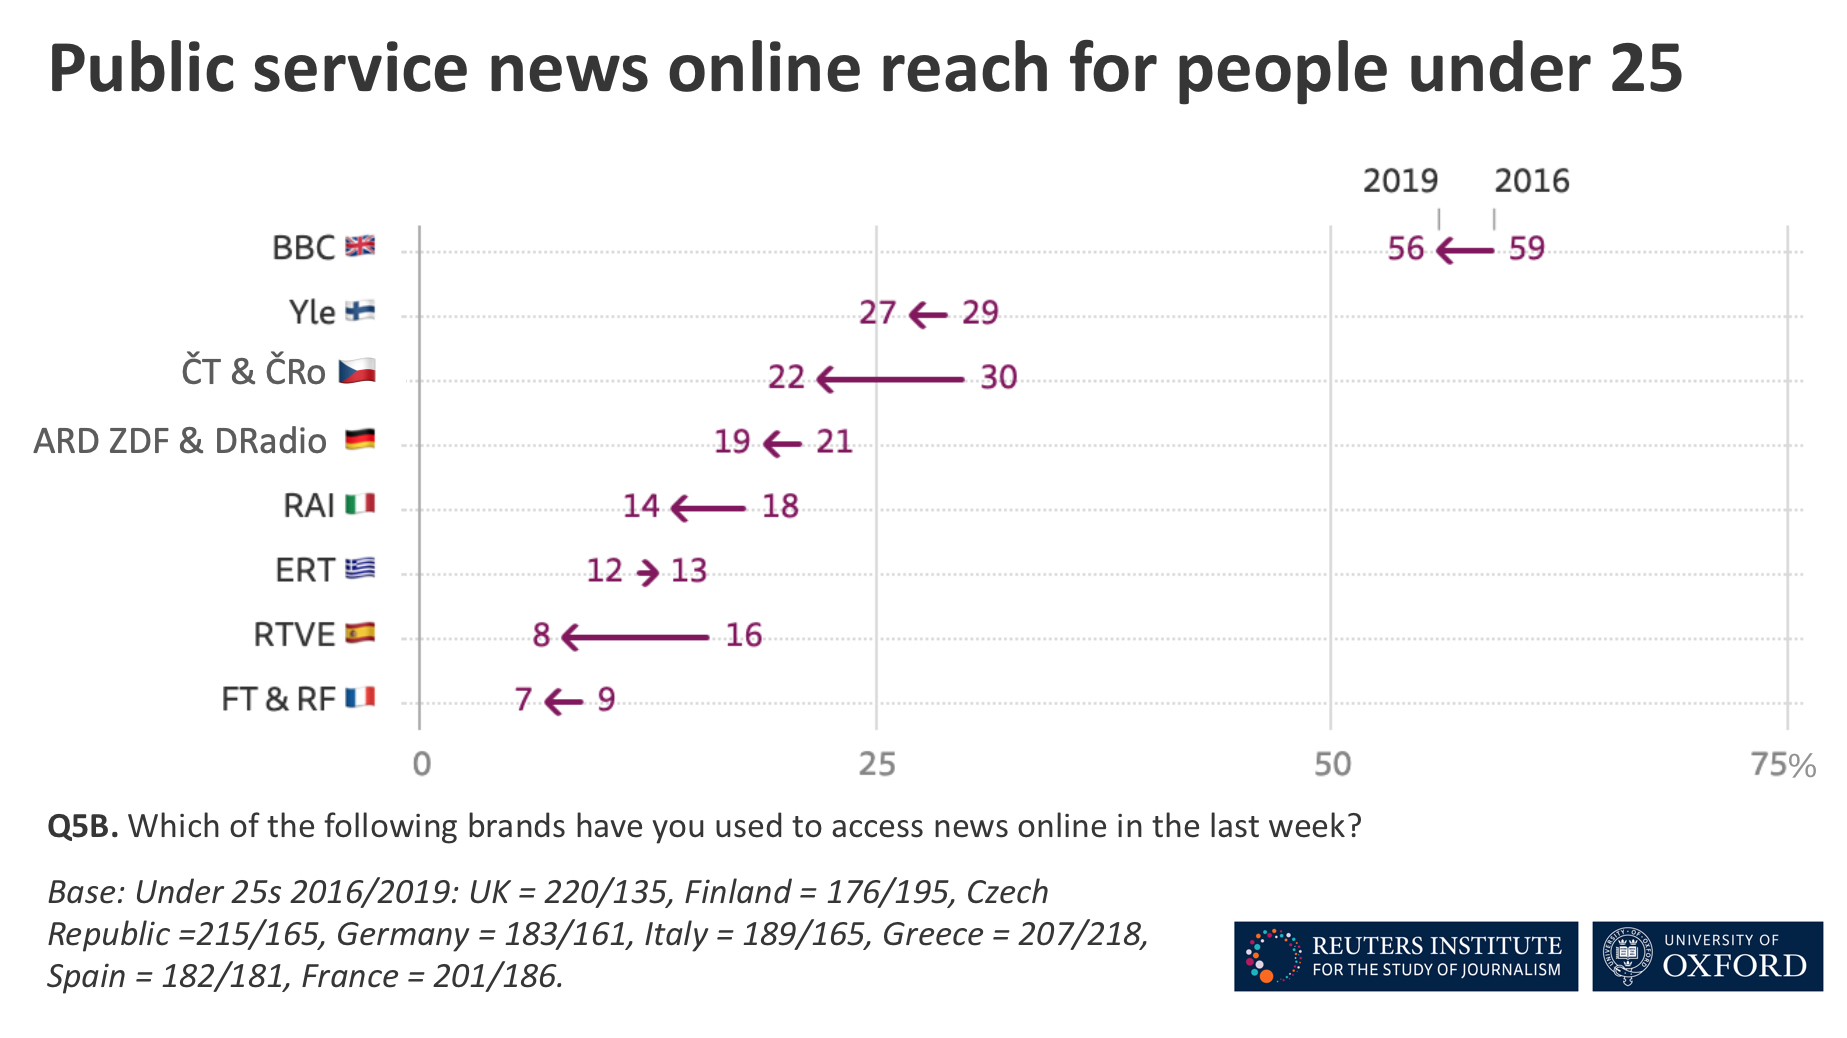 Online reach of public service news among people under 25 in 2016 and 2019